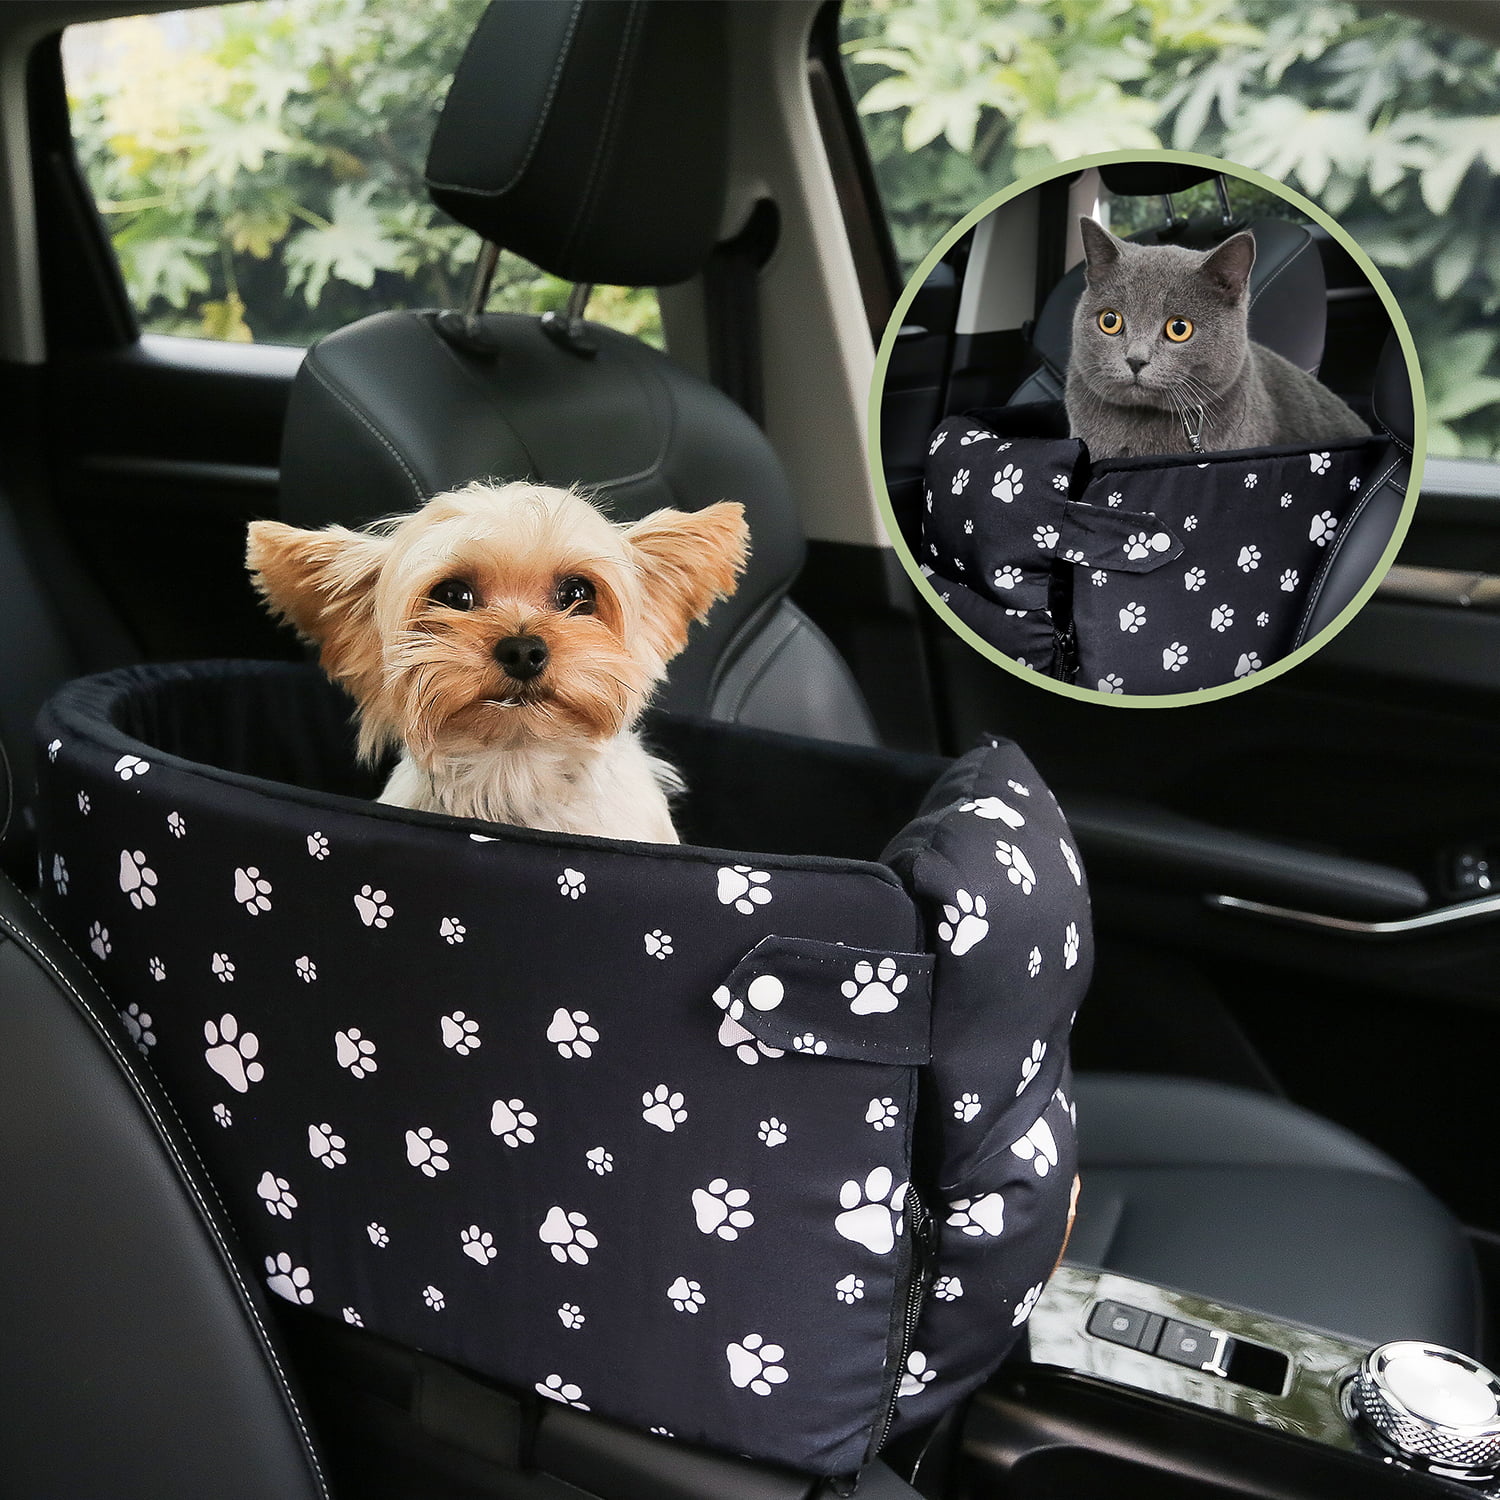 Dog Car Seat Cover Pet Car Booster Seat Waterproof Cat Seat Protector Travel Carrier Bag for Small Dogs Cats Puppy with Safety Leash Pet Dog Car Supplies 